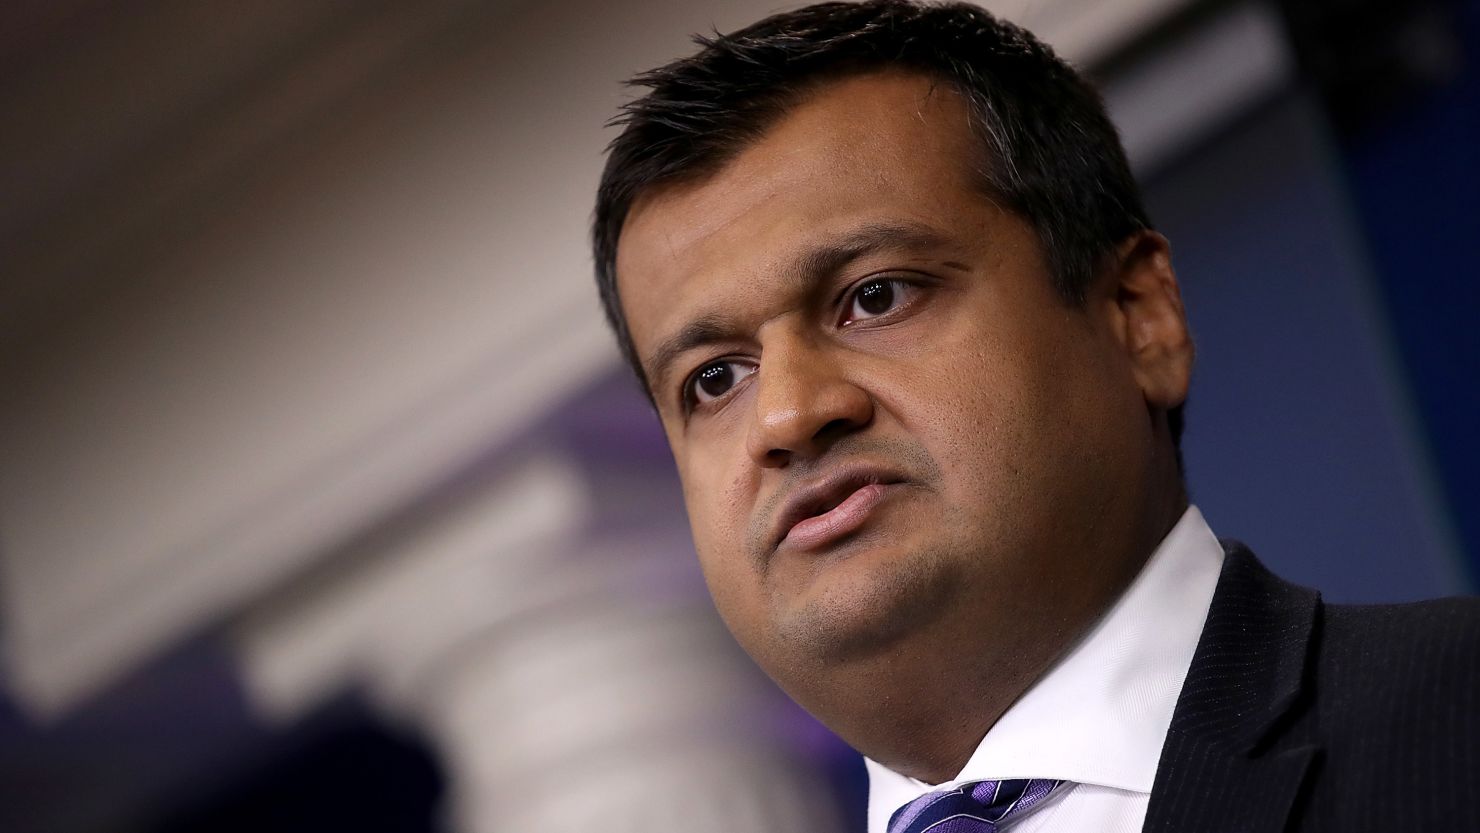 Then-White House deputy press secretary Raj Shah answers questions during a White House briefing on May 14, 2018, in Washington, DC.